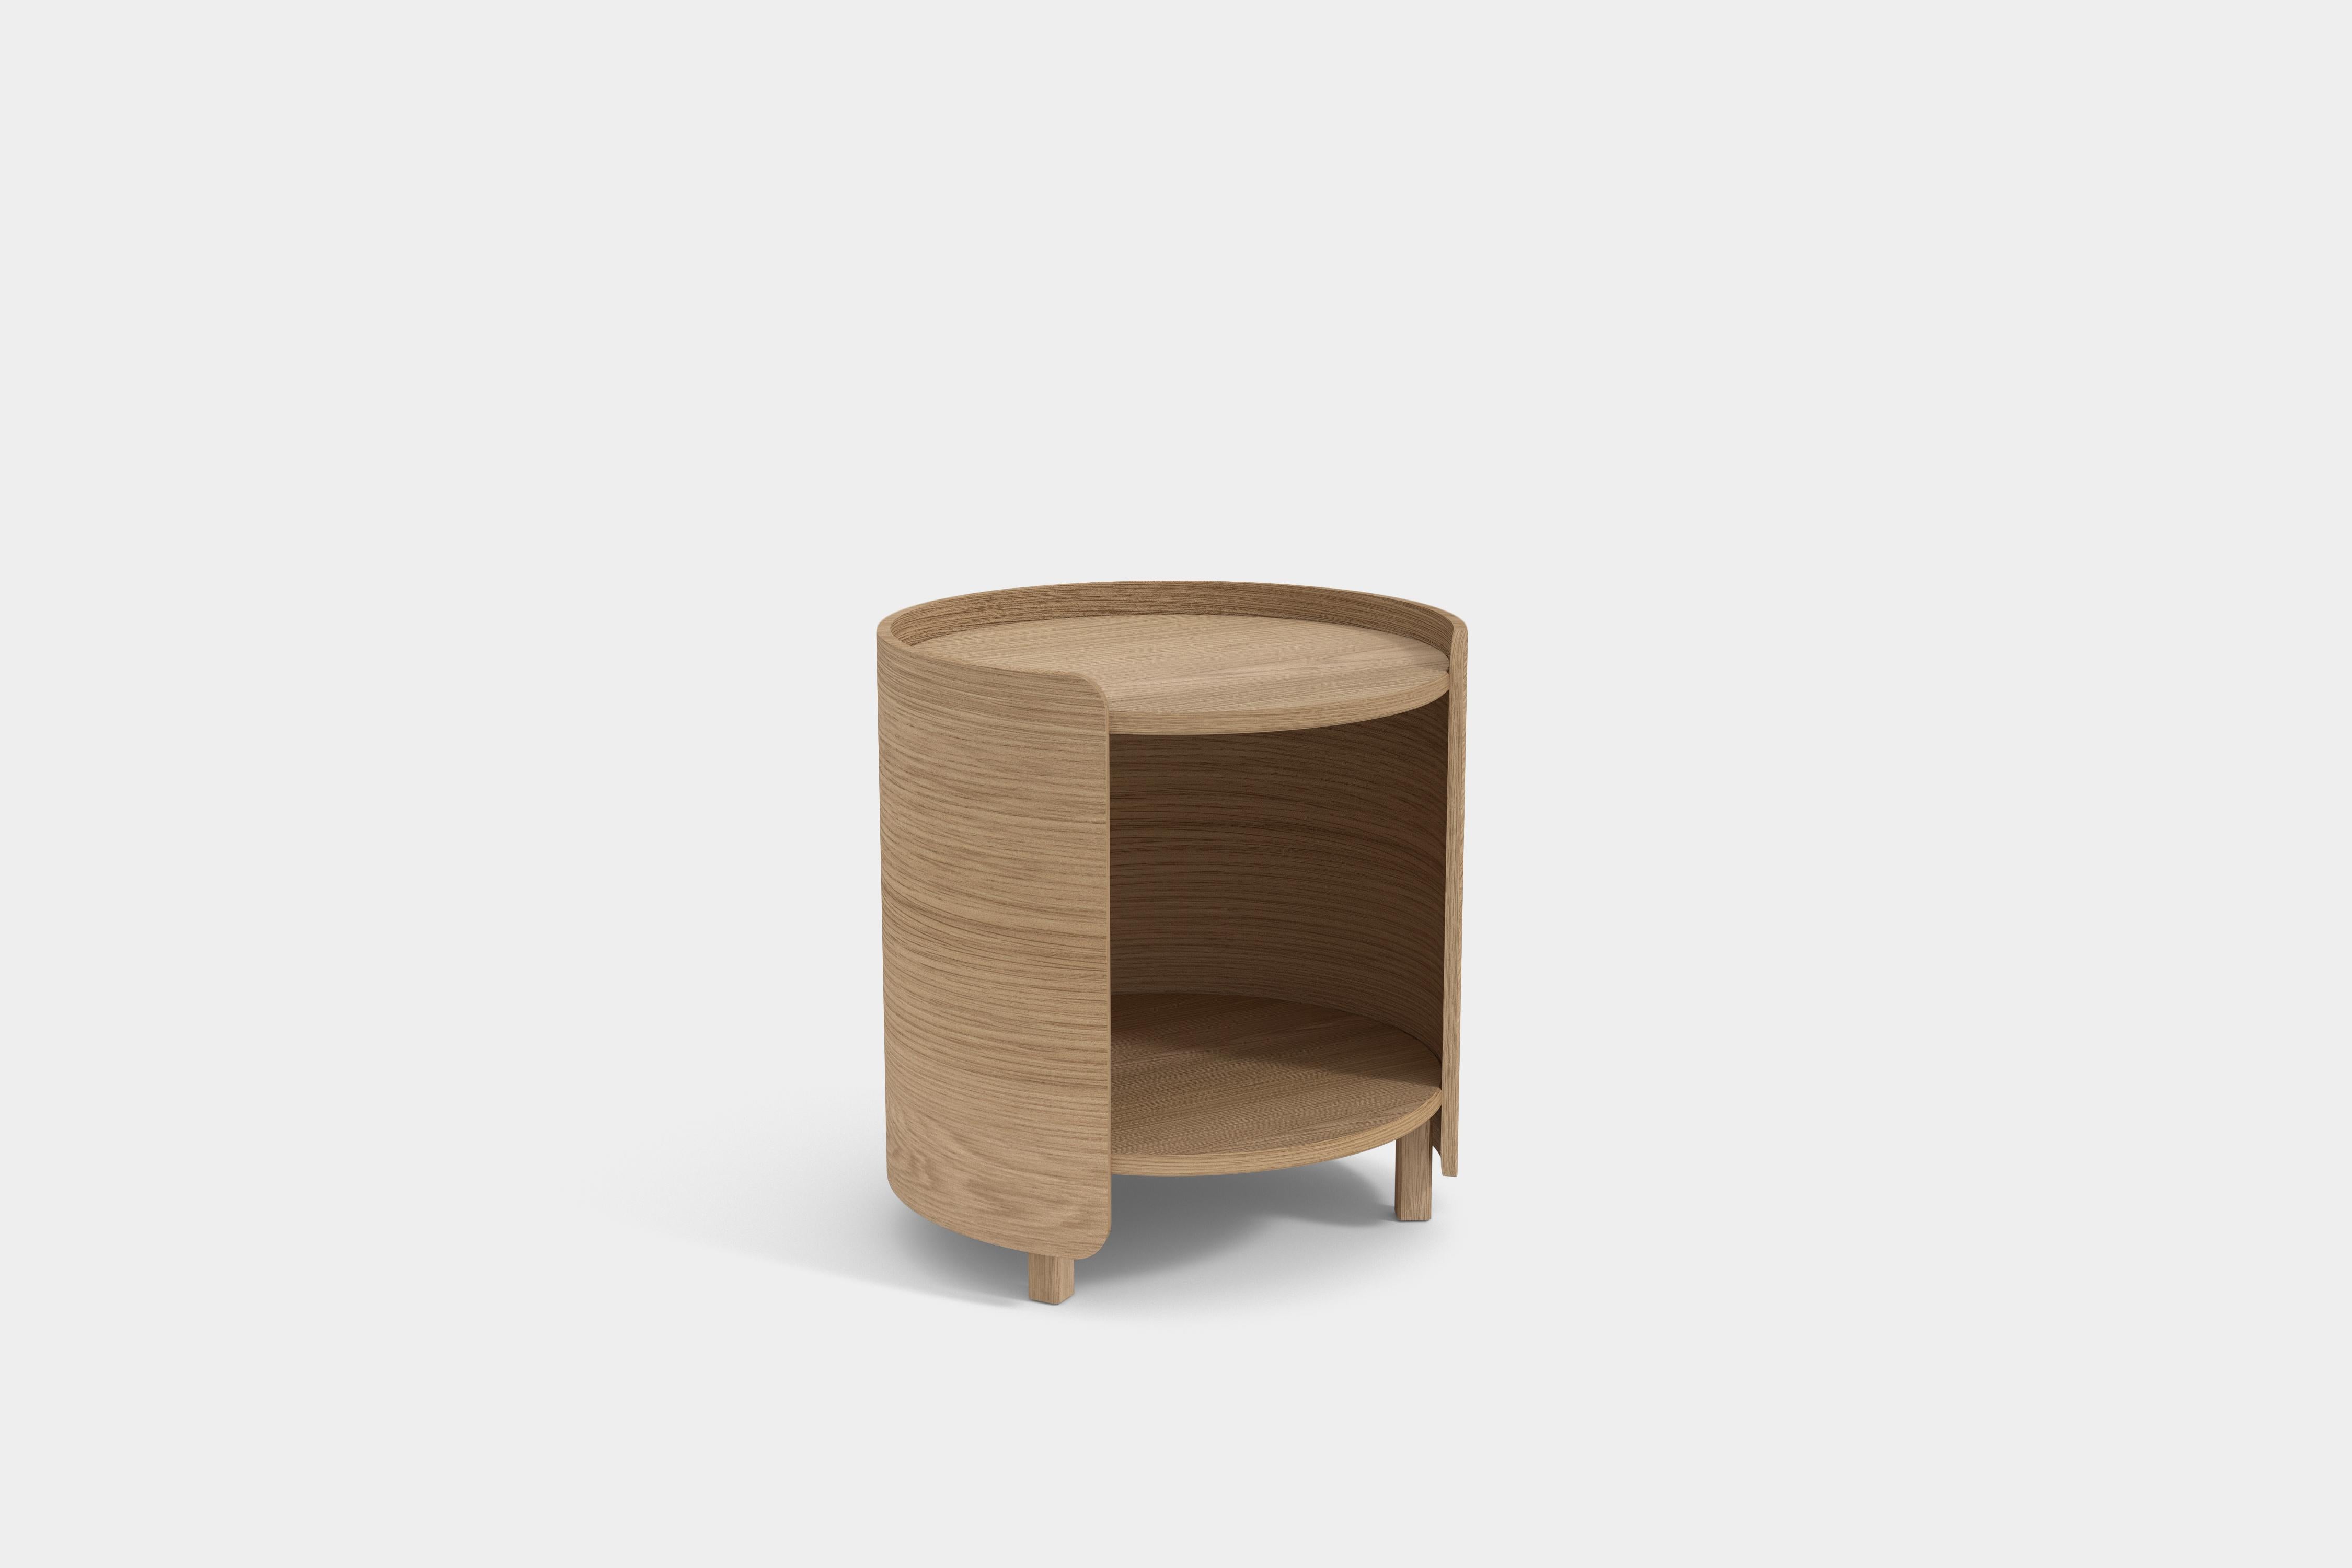 Prima Side Table, Night Stand, Auxiliary Table in Oak Wood Finish by Joel Escalona

Prima Collection is born under the idea of creating fundamental pieces for the home, those that you simply cannot imagine your space without.

Prima side table will